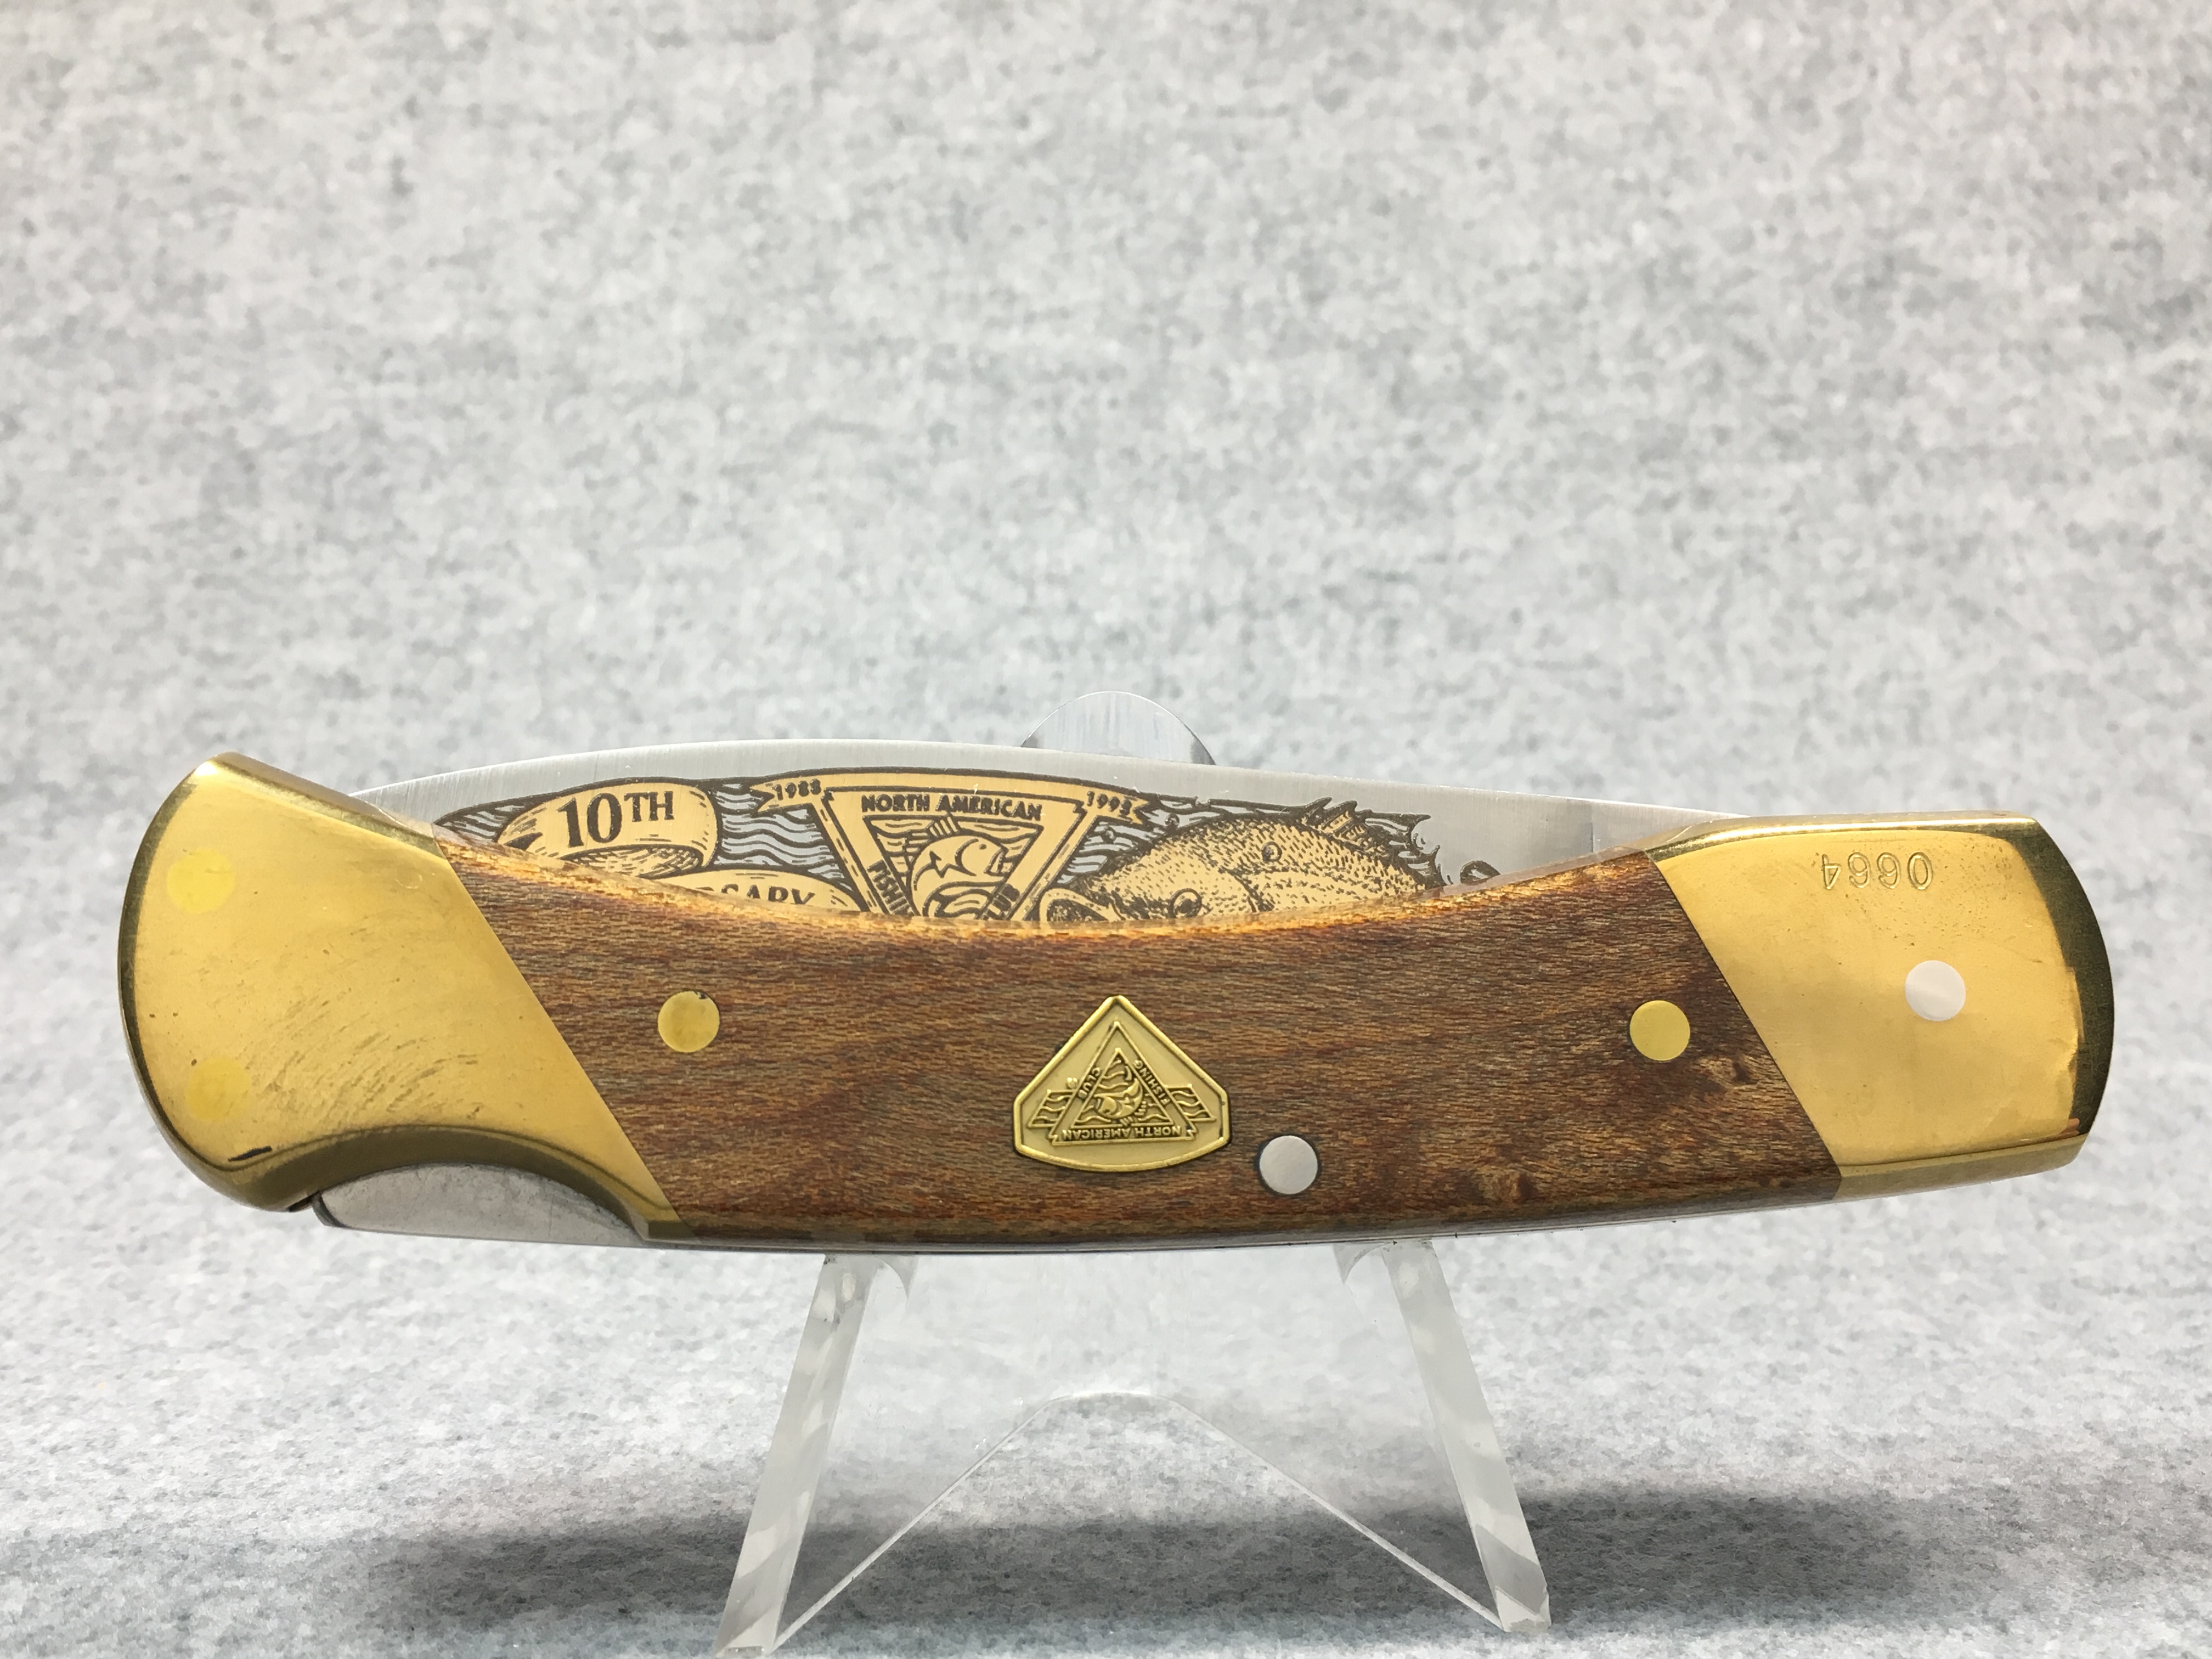 HMF this pocket knife from this North American Fishing Club